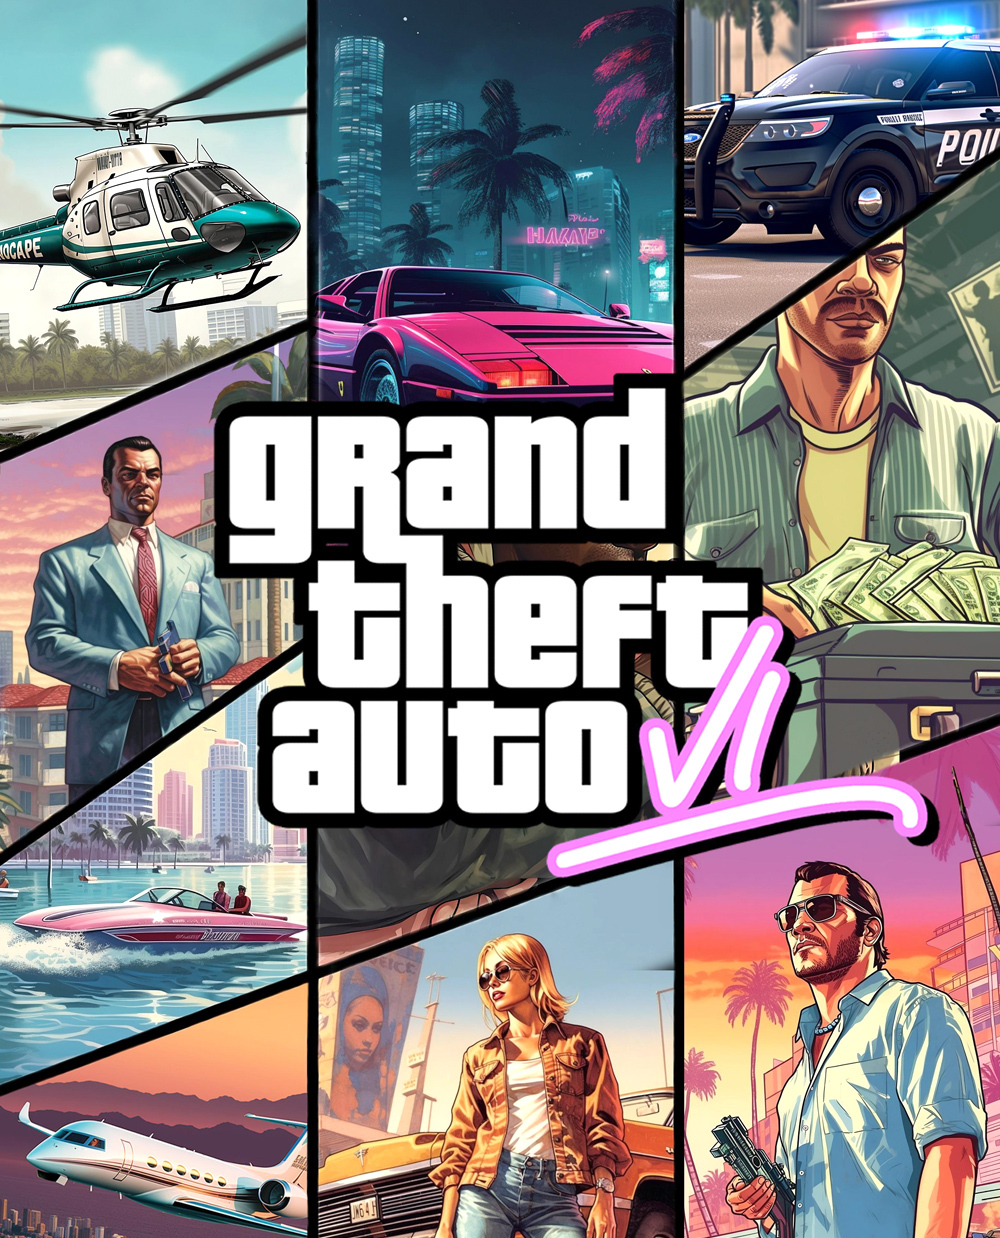 What price will gta 5 be фото 11